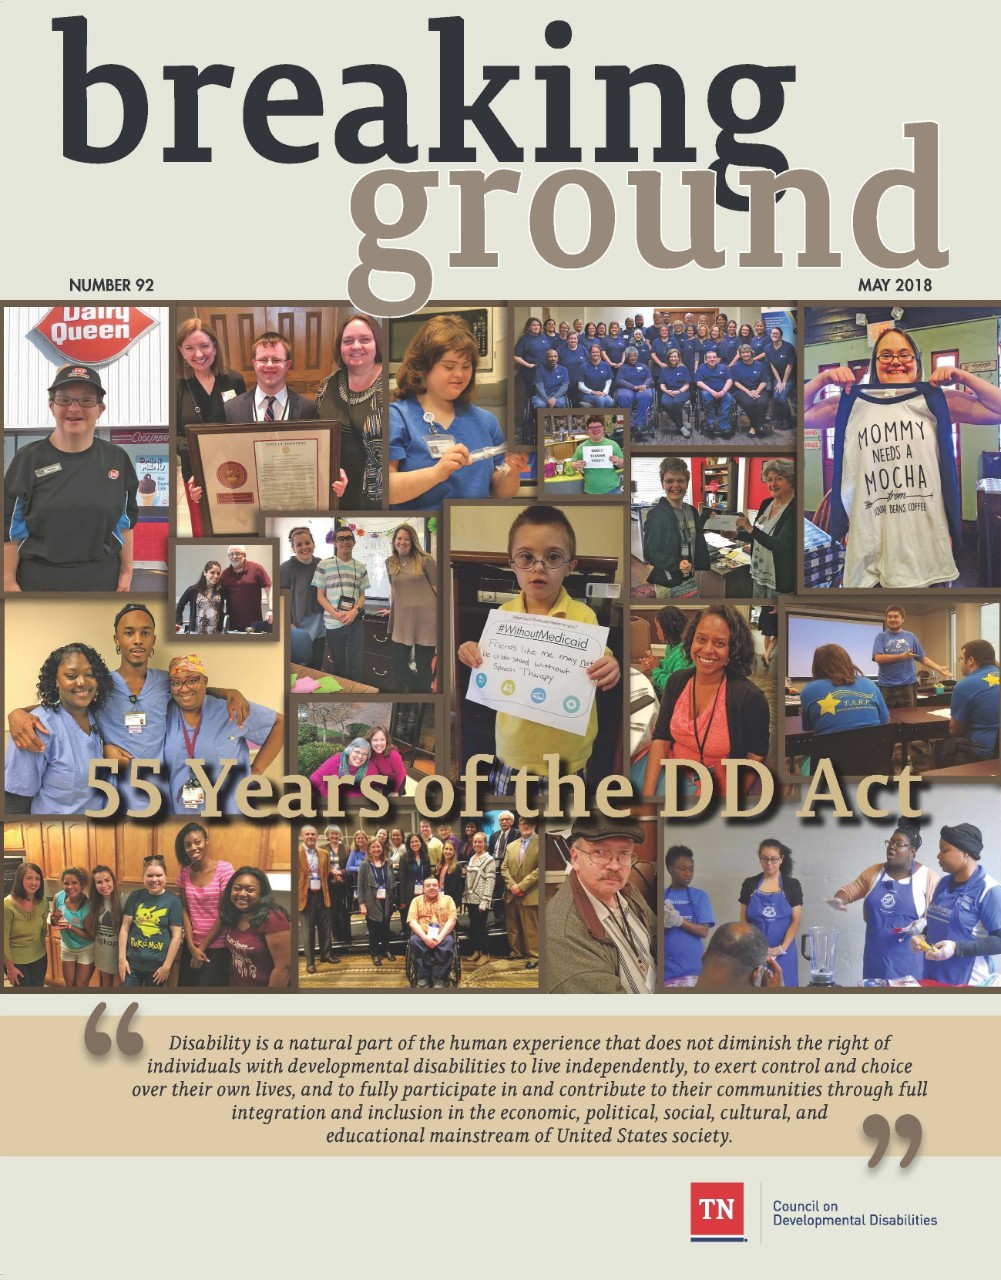 The cover has a collage of images of different individuals, many with disabilities, and groups in various settings. Across the middle of the collage of photos are the words “55 Years of the DD Act”. Below the photo collage is a large font quote that says “Disability is a natural part of the human experience that does not diminish the right of individuals with developmental disabilities to live independently, to exert control and choice over their own lives, and to fully participate in and contribute to their communities through full integration and inclusion in the economic, political, social, cultural, and educational mainstream of United States society.” Below the quote is the logo for the TN Council on Developmental Disabilities.